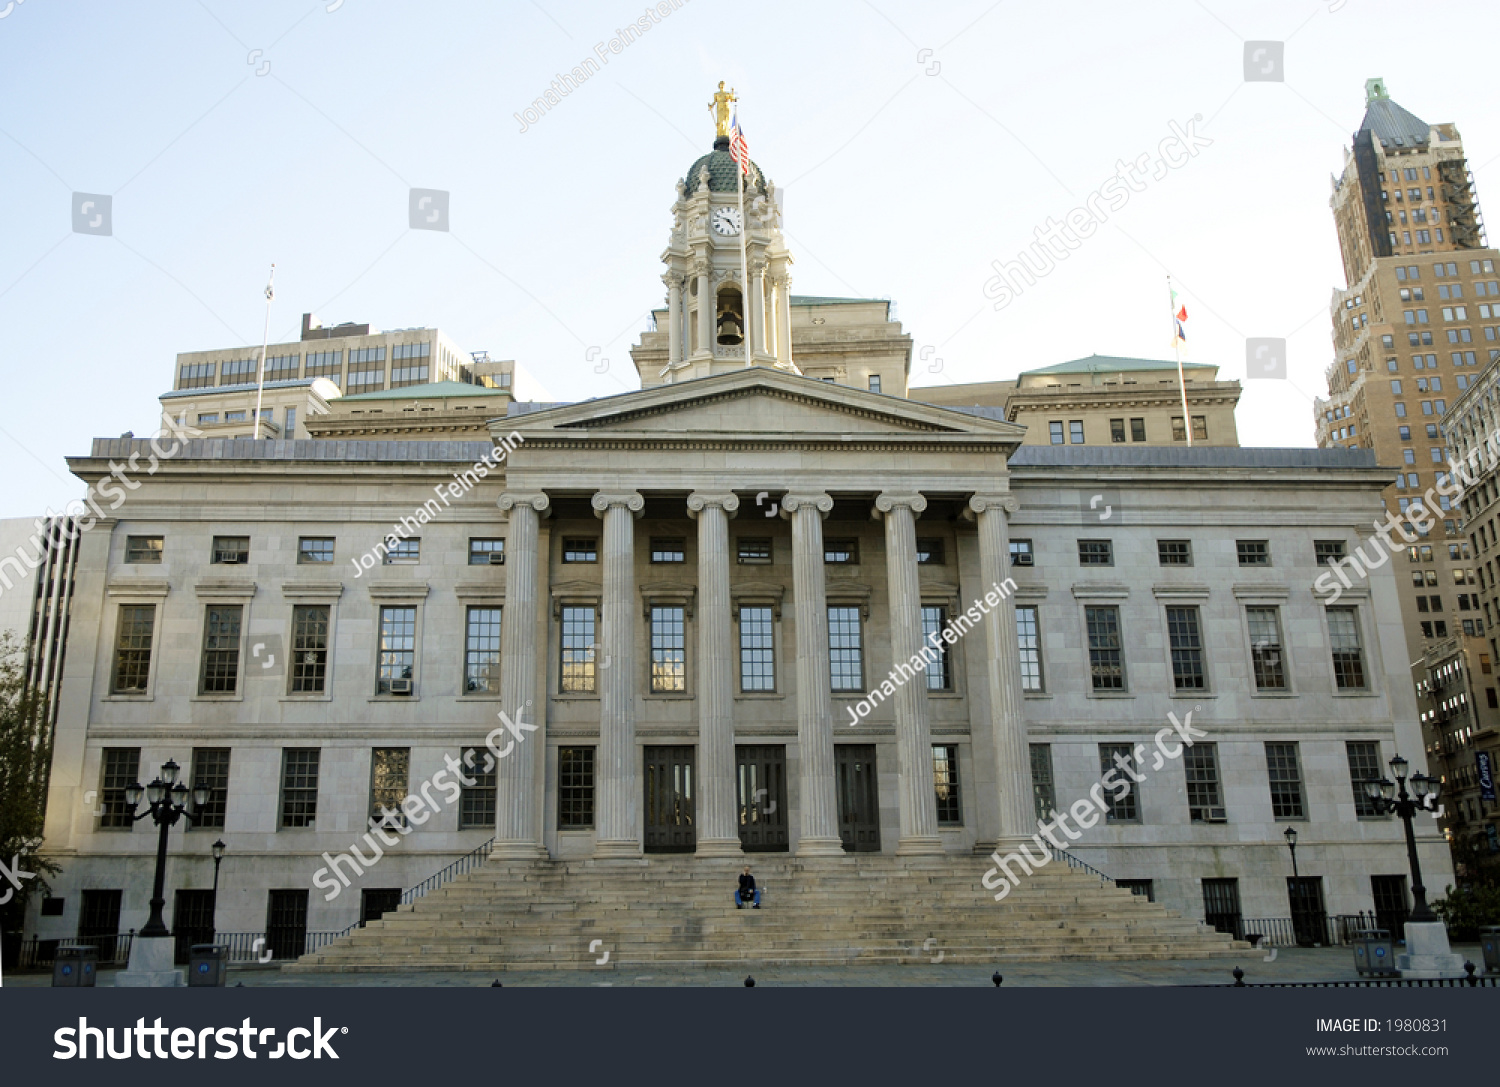 Brooklyn Courthouse Stock Photo 1980831 : Shutterstock